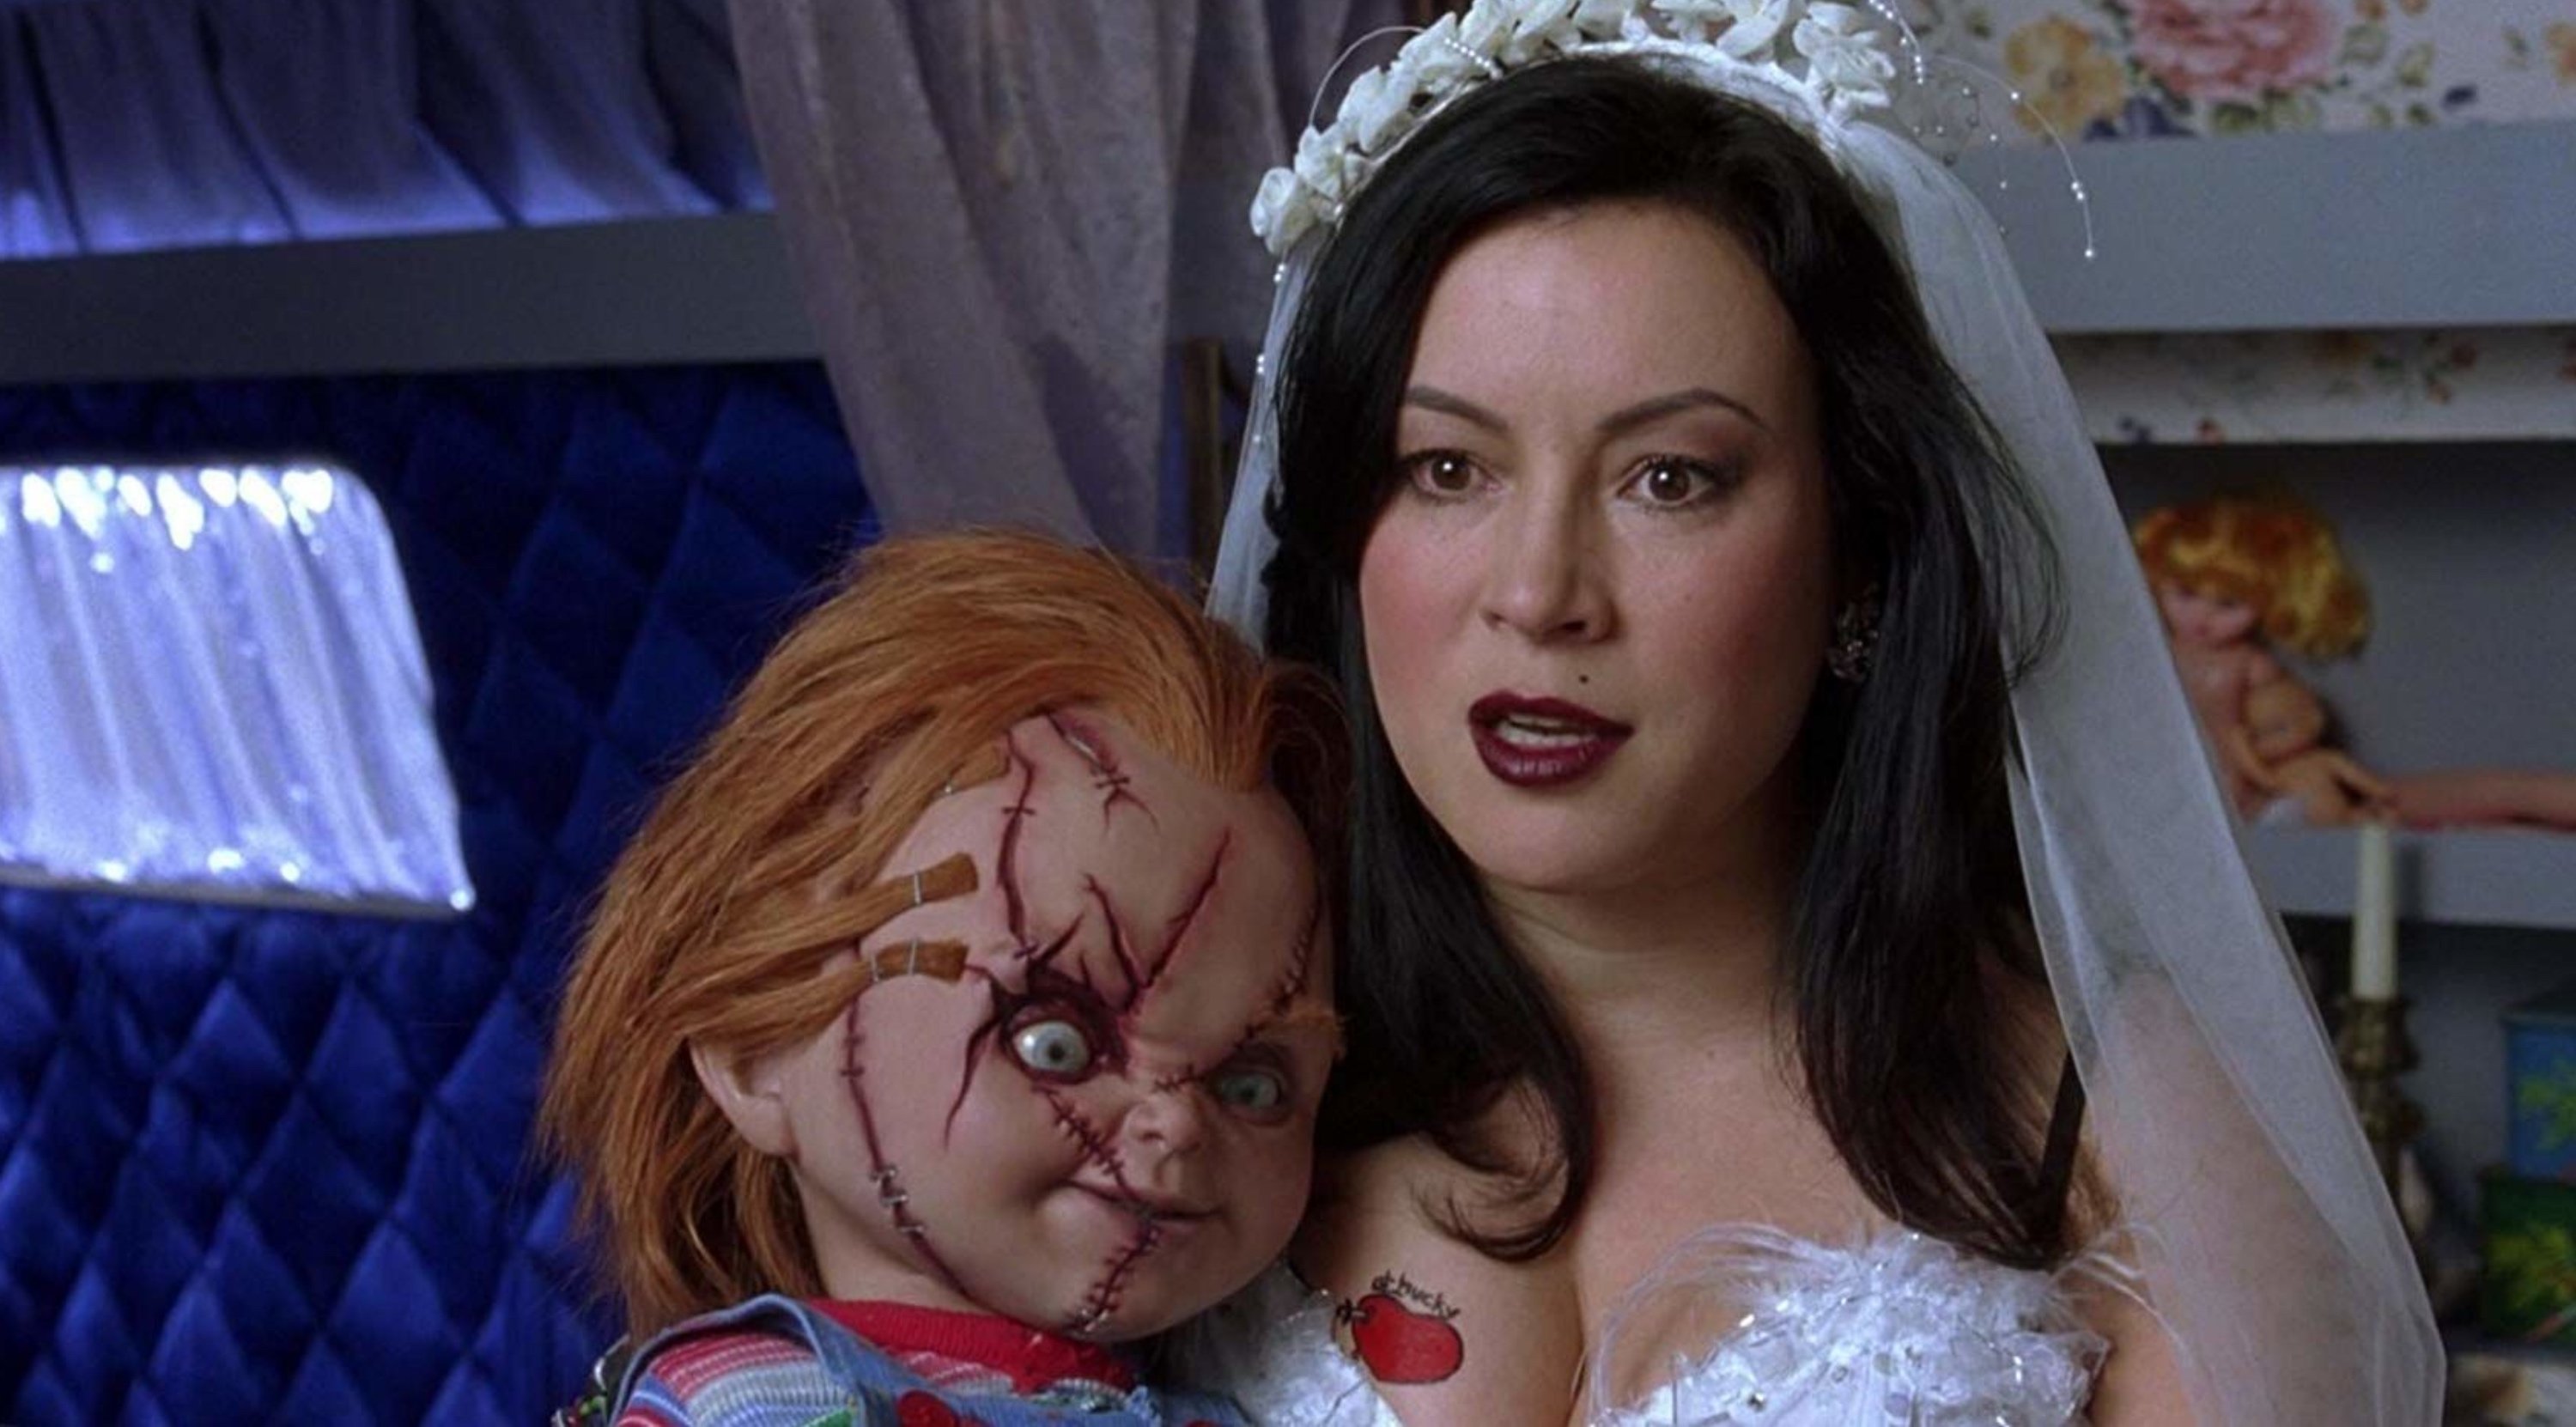 ‘chucky Episode 5 Reveals How Charles Lee Ray Met Tiffany Valentine 